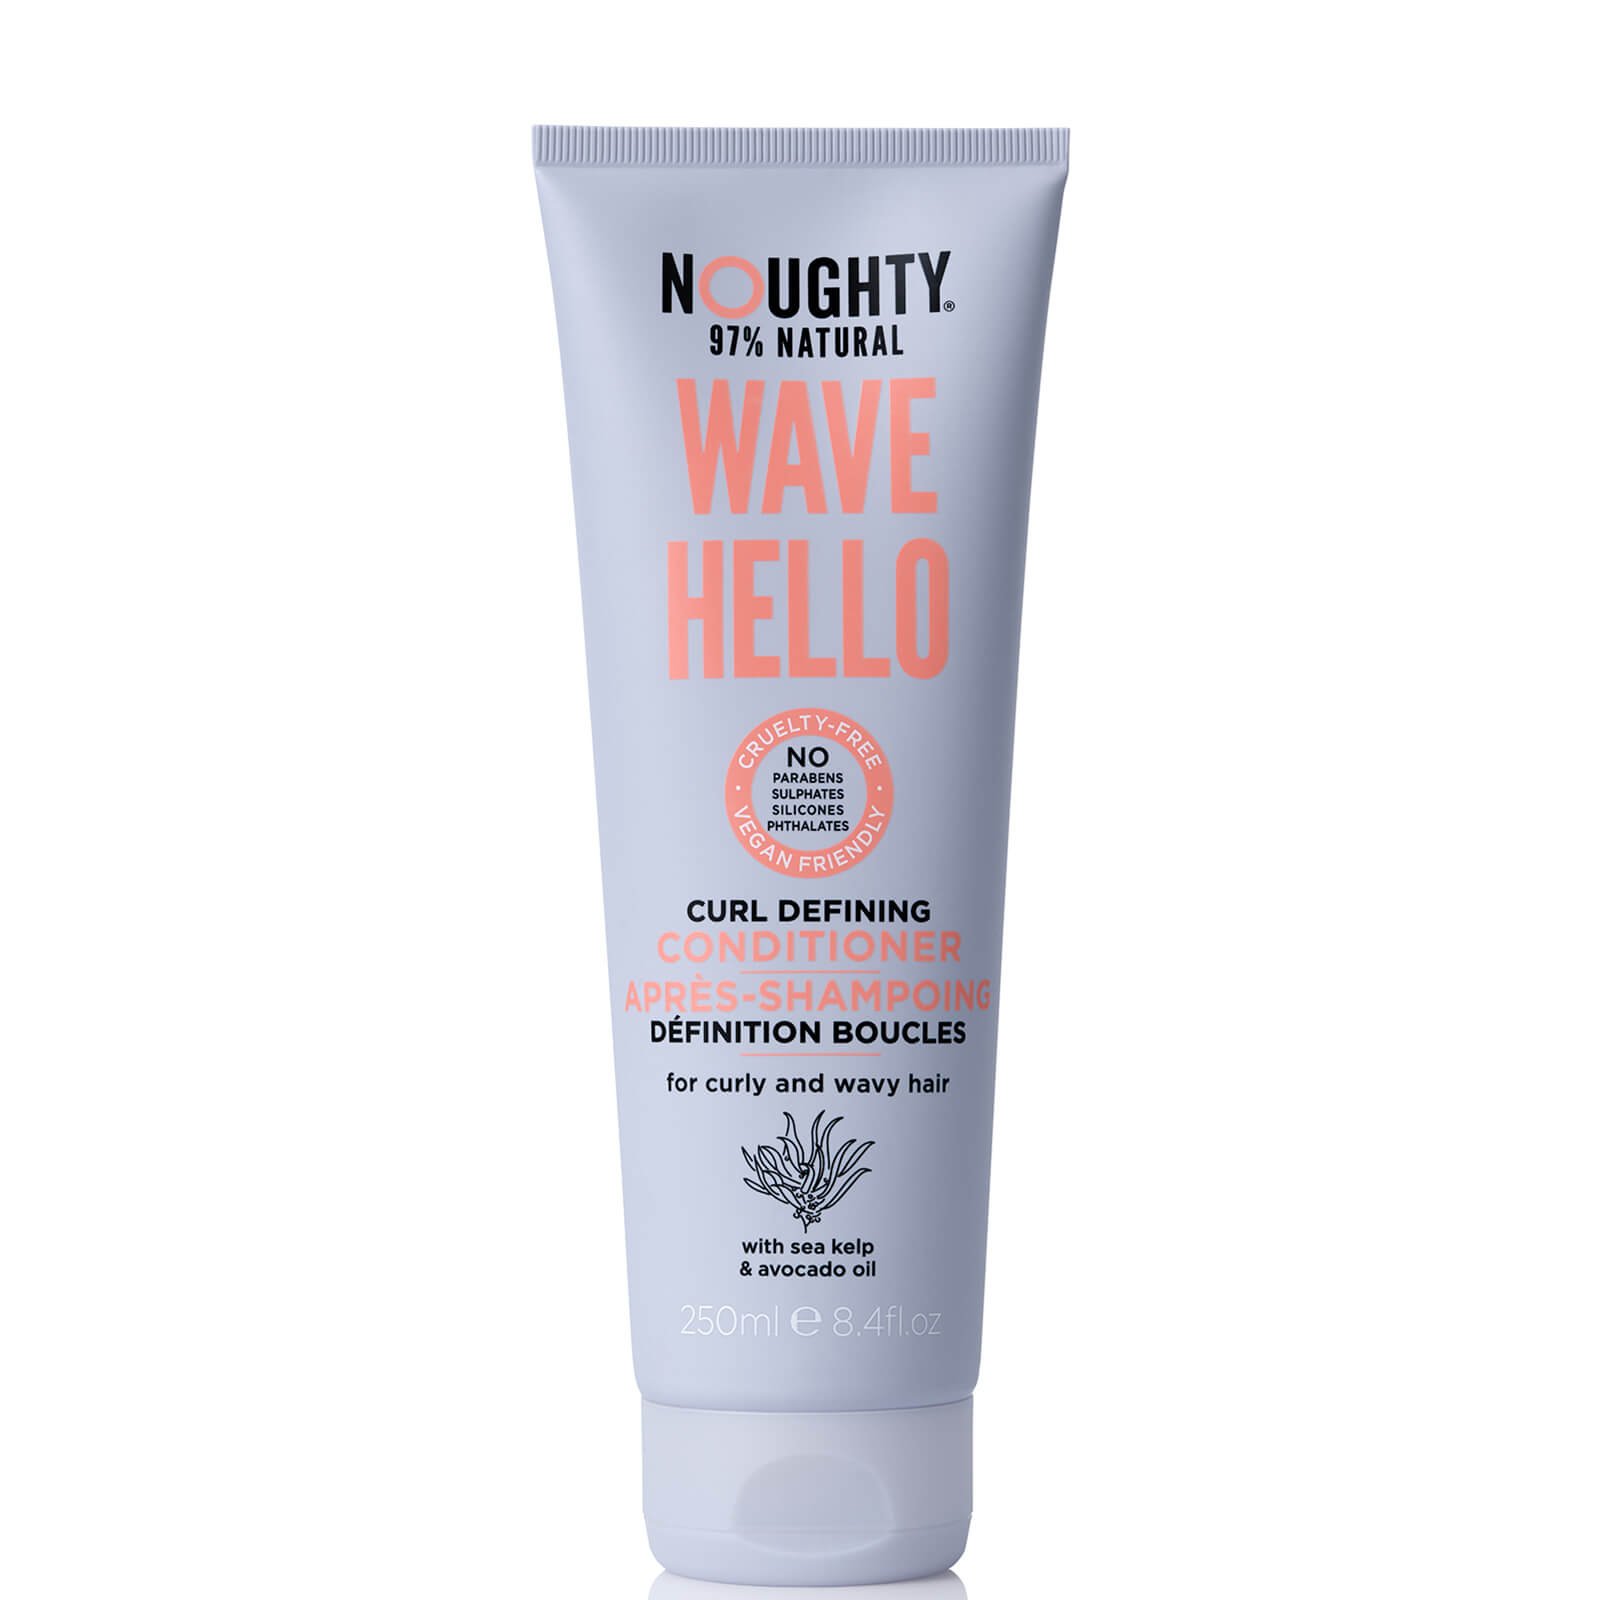 Noughty Wave Hello Curl Defining Conditioner 250ml product